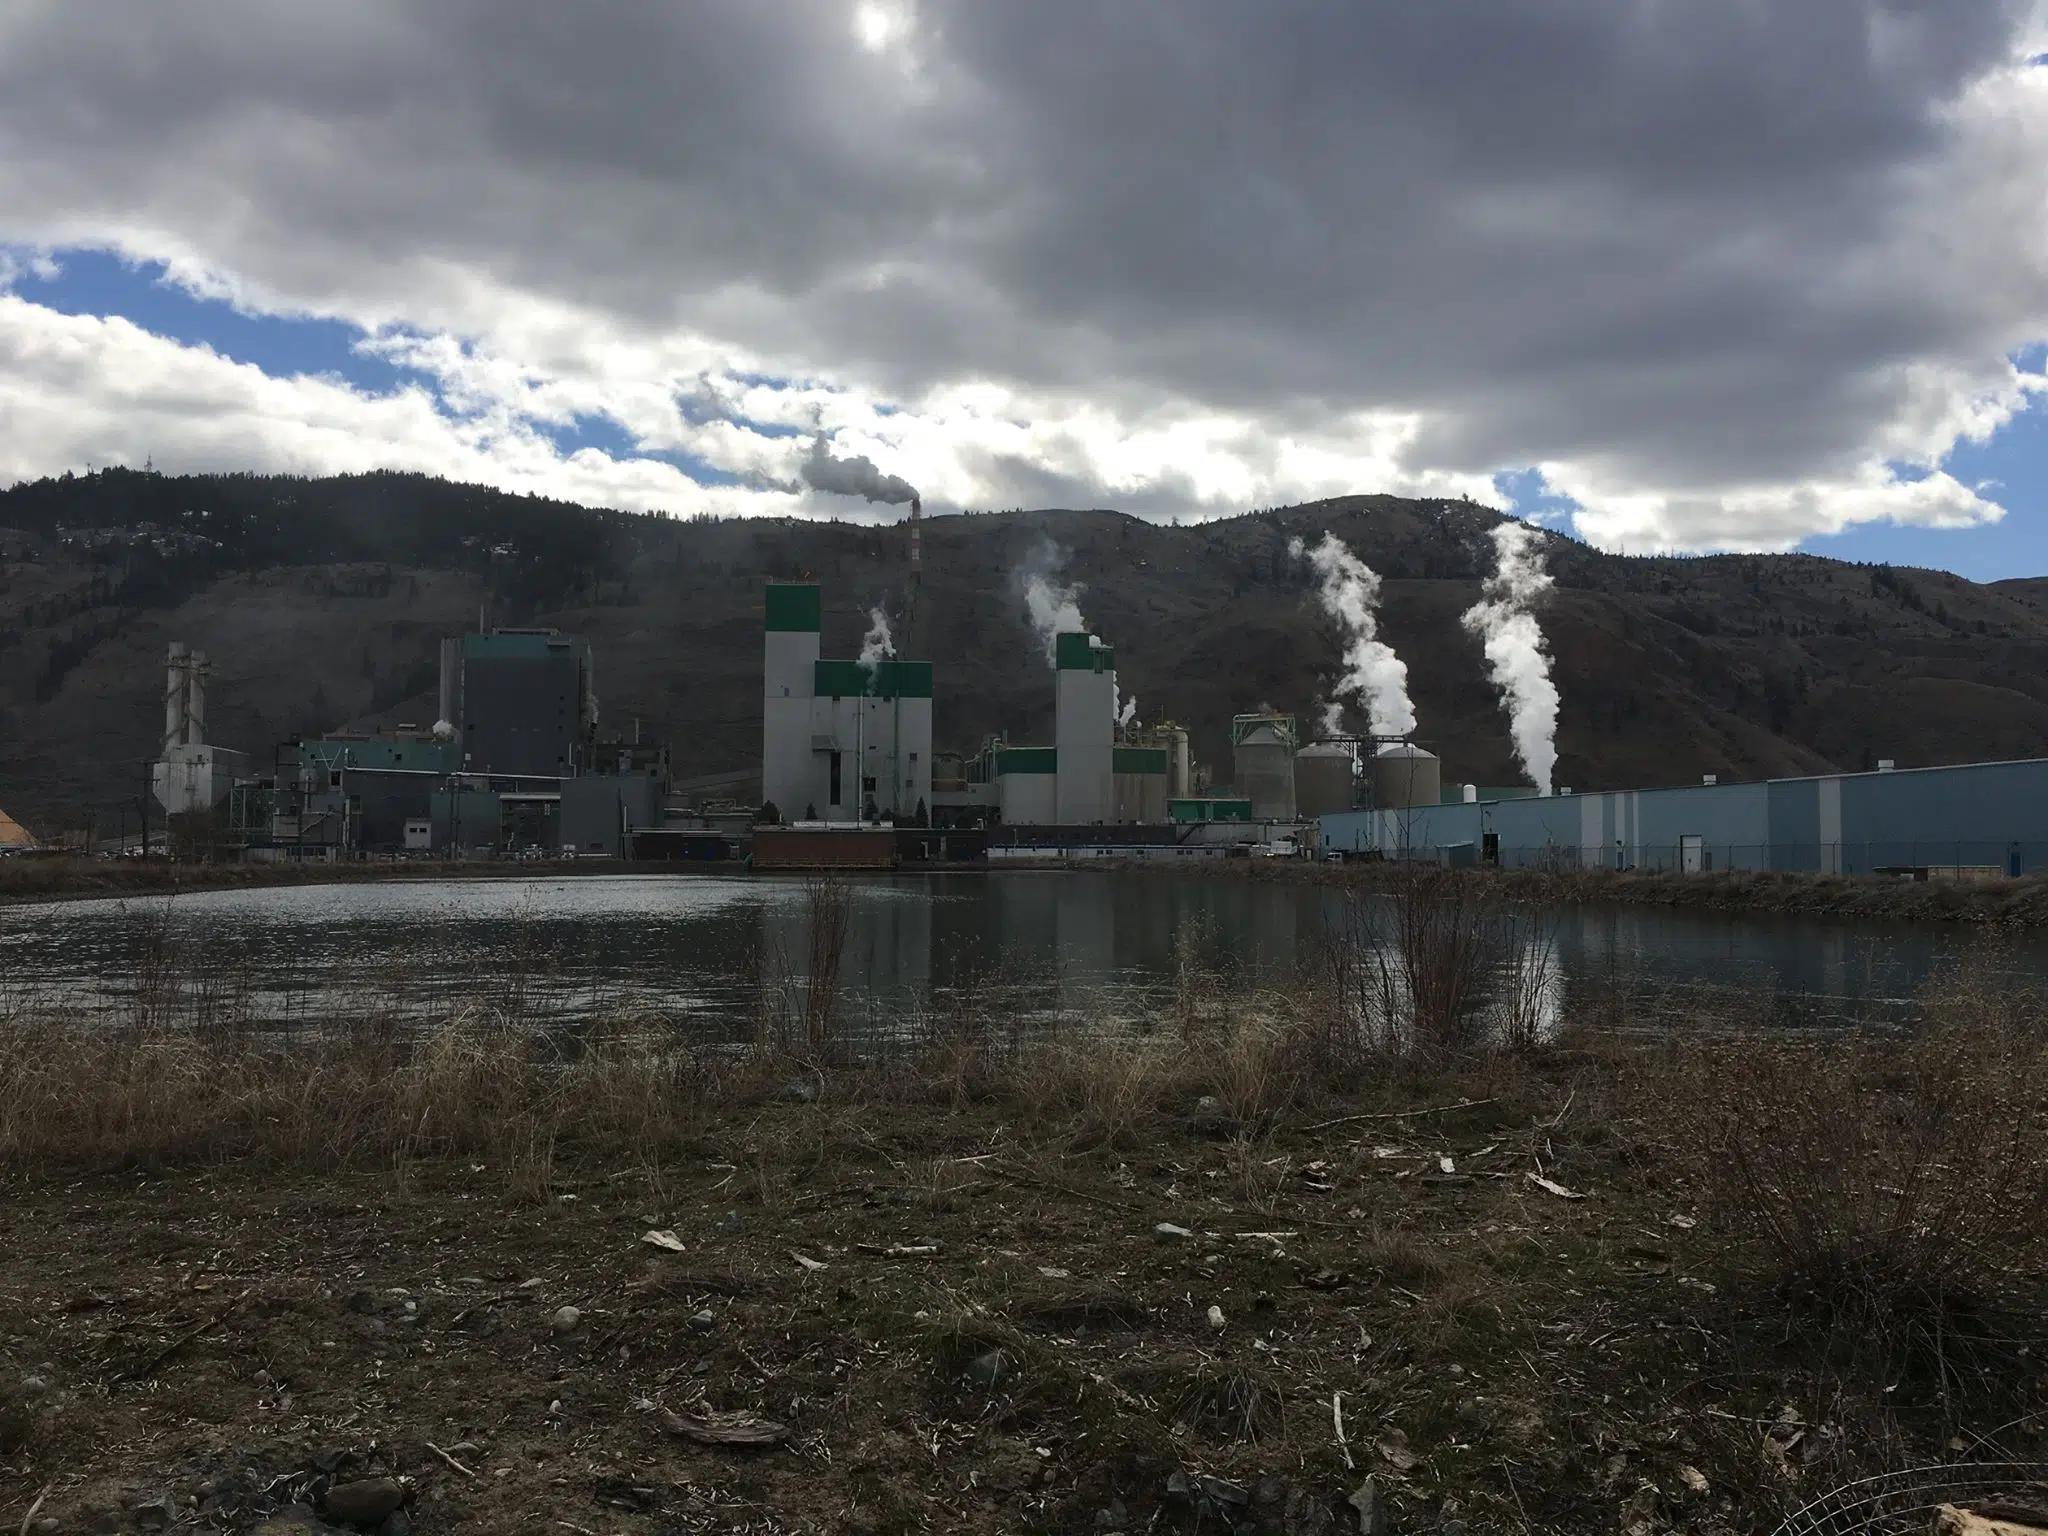 As Kamloops Council approves mill rates, the Mayor says there's issue with the cost for major industry